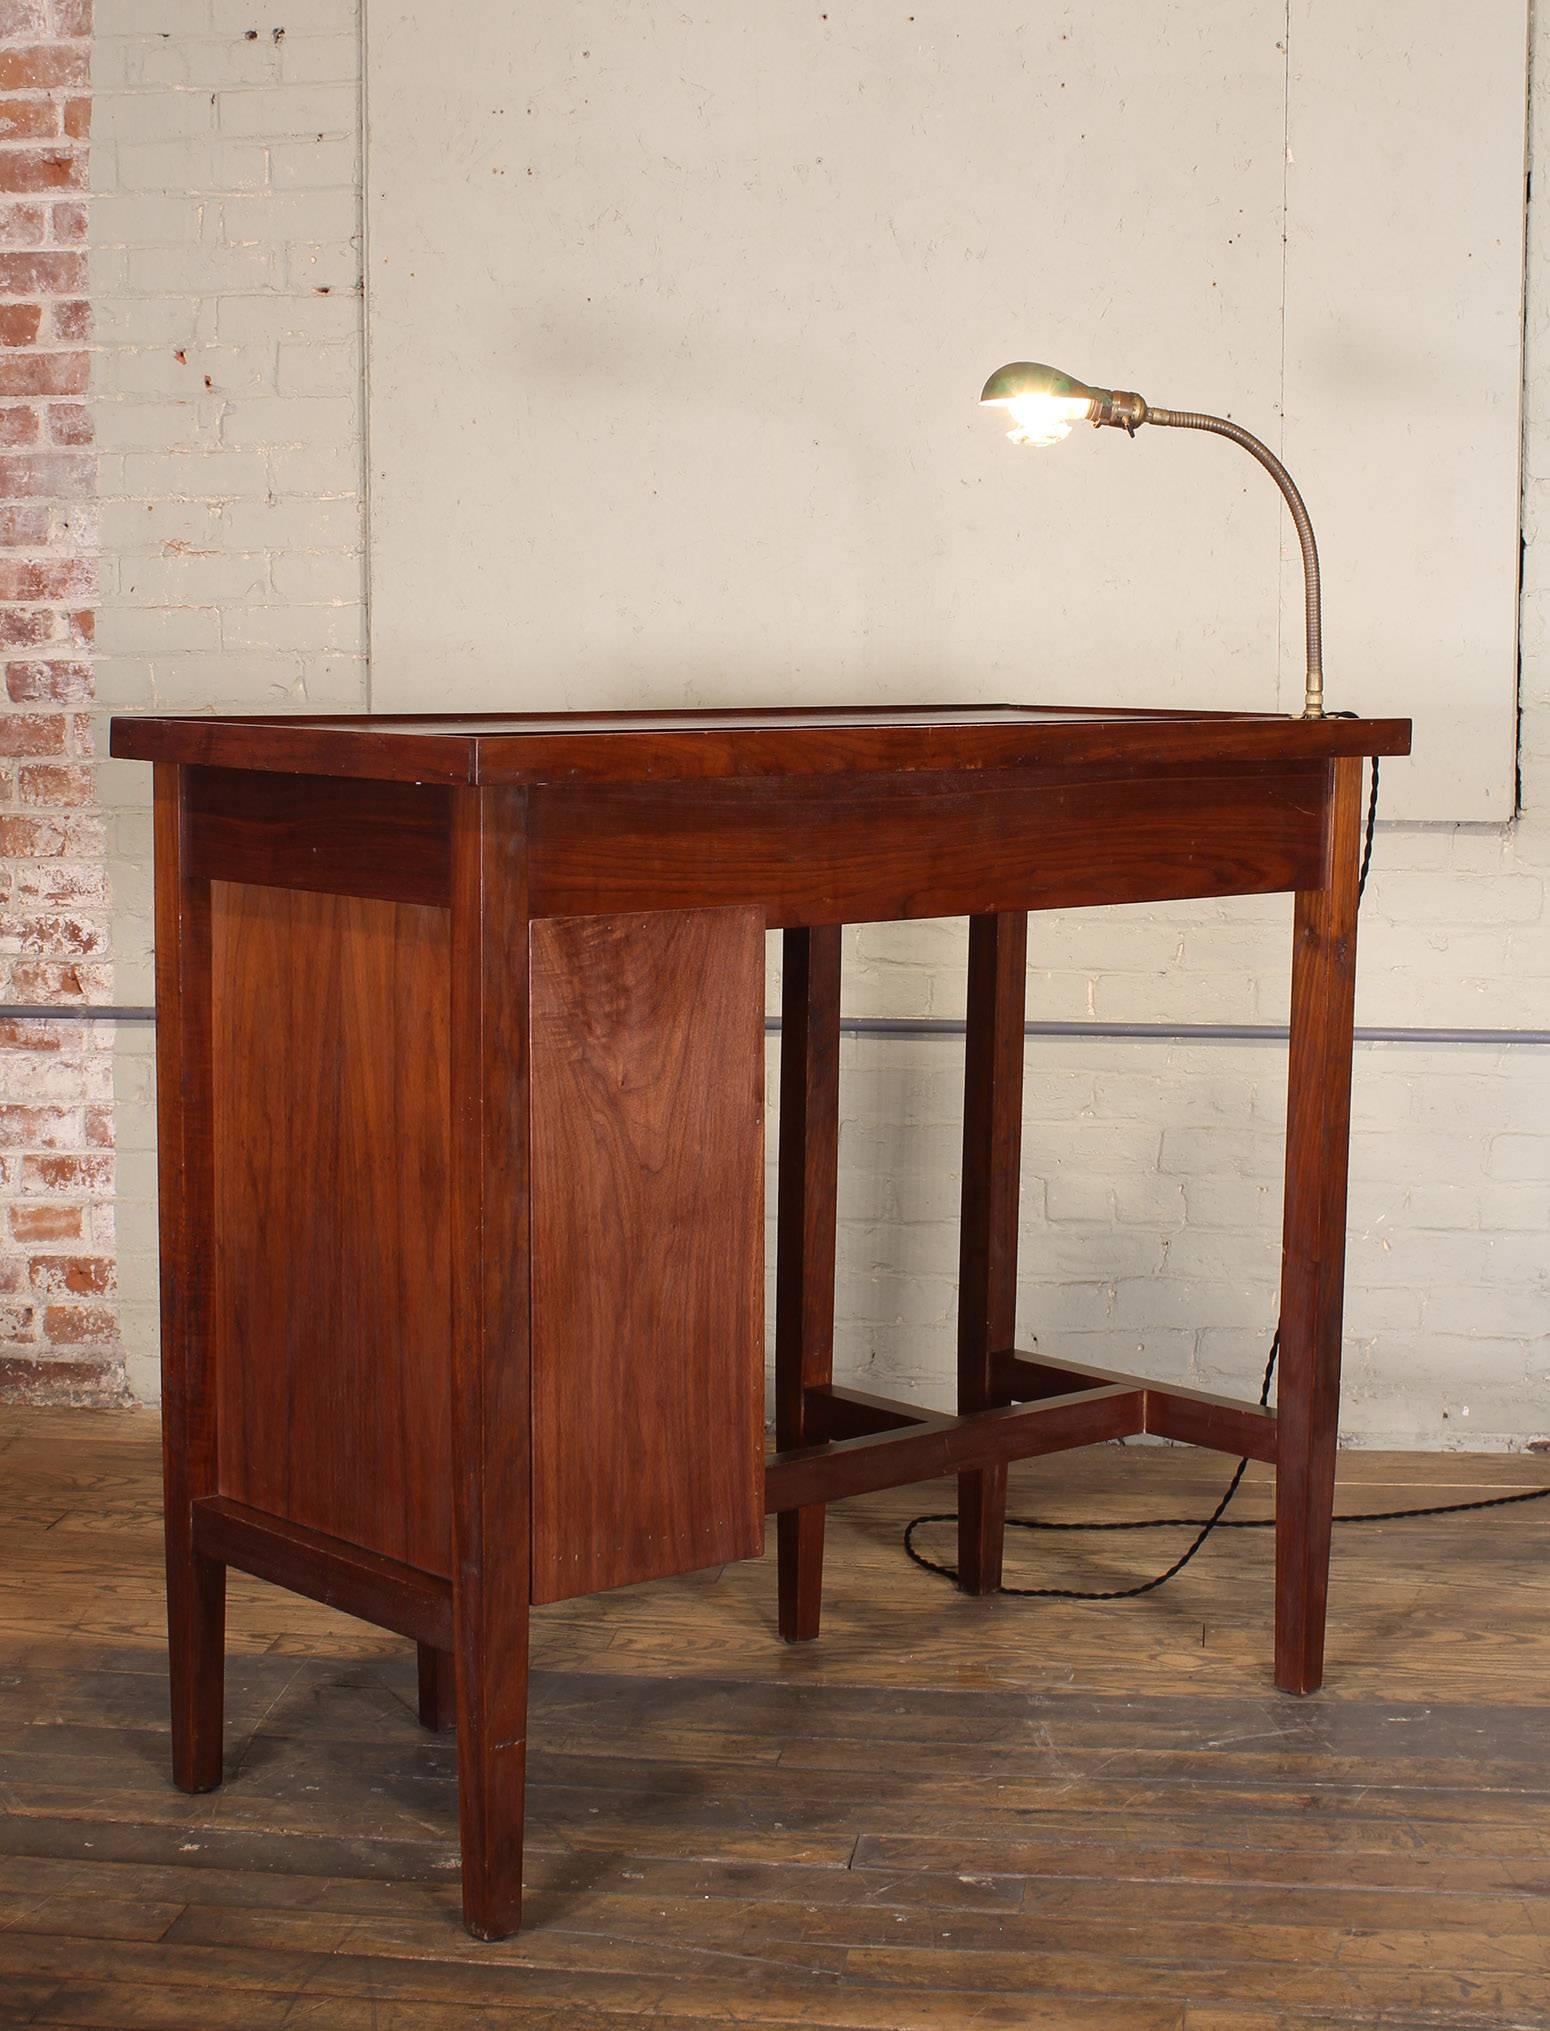 Vintage Jewelers Workbench Table & Desk Lamp with 